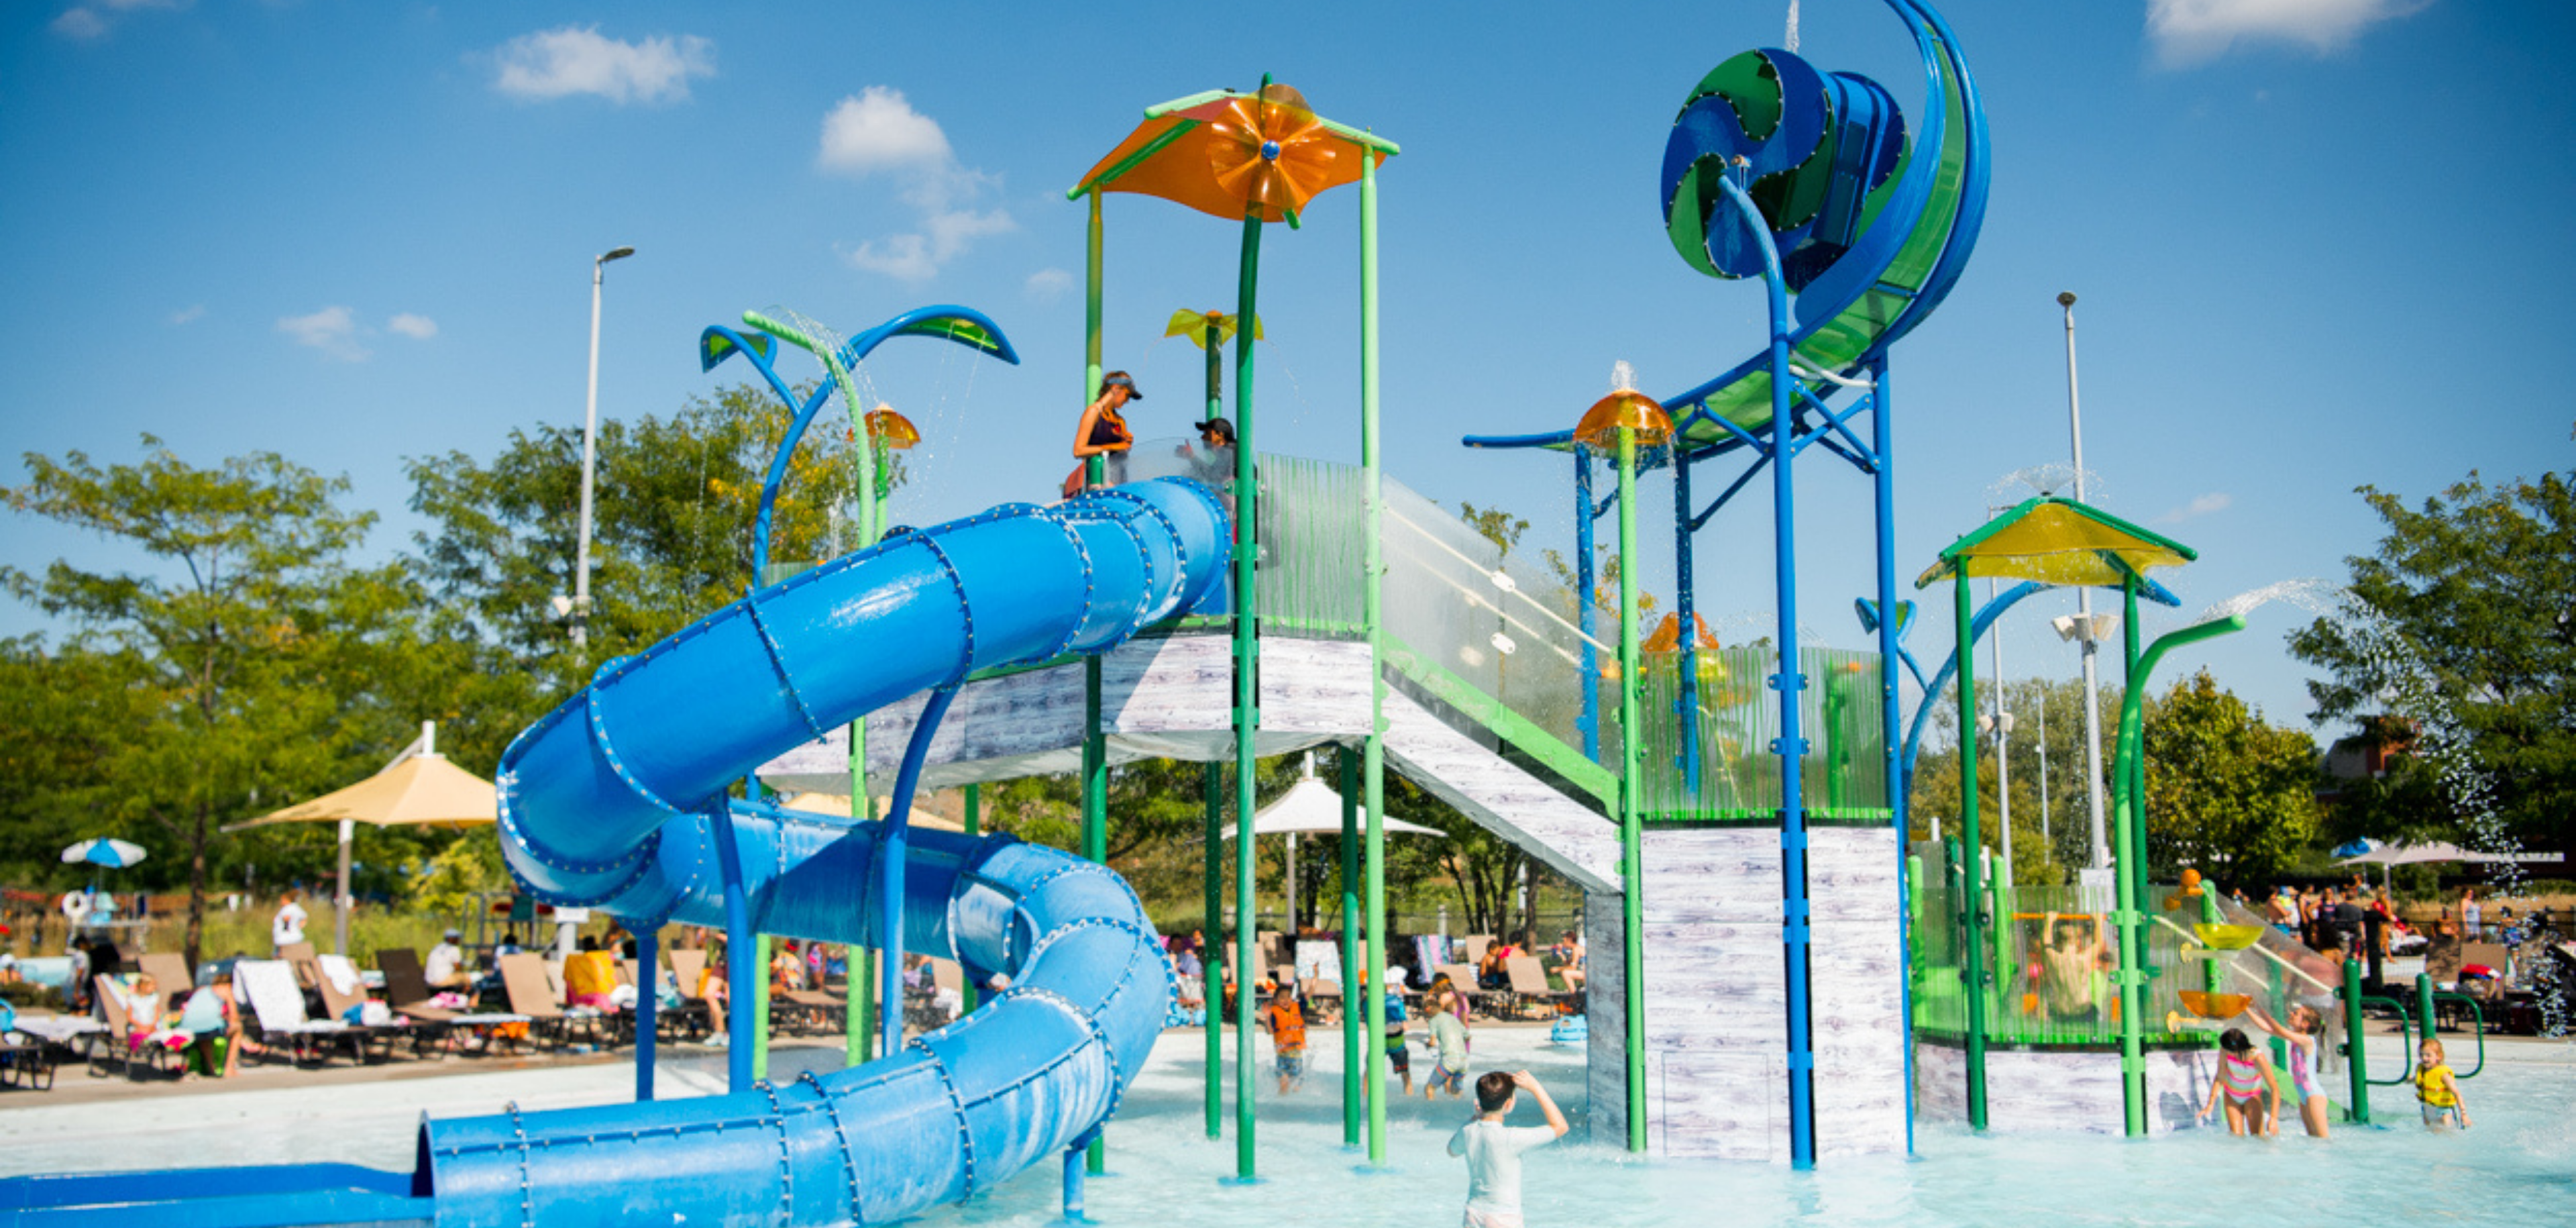 Activity Pool at The Waterpark